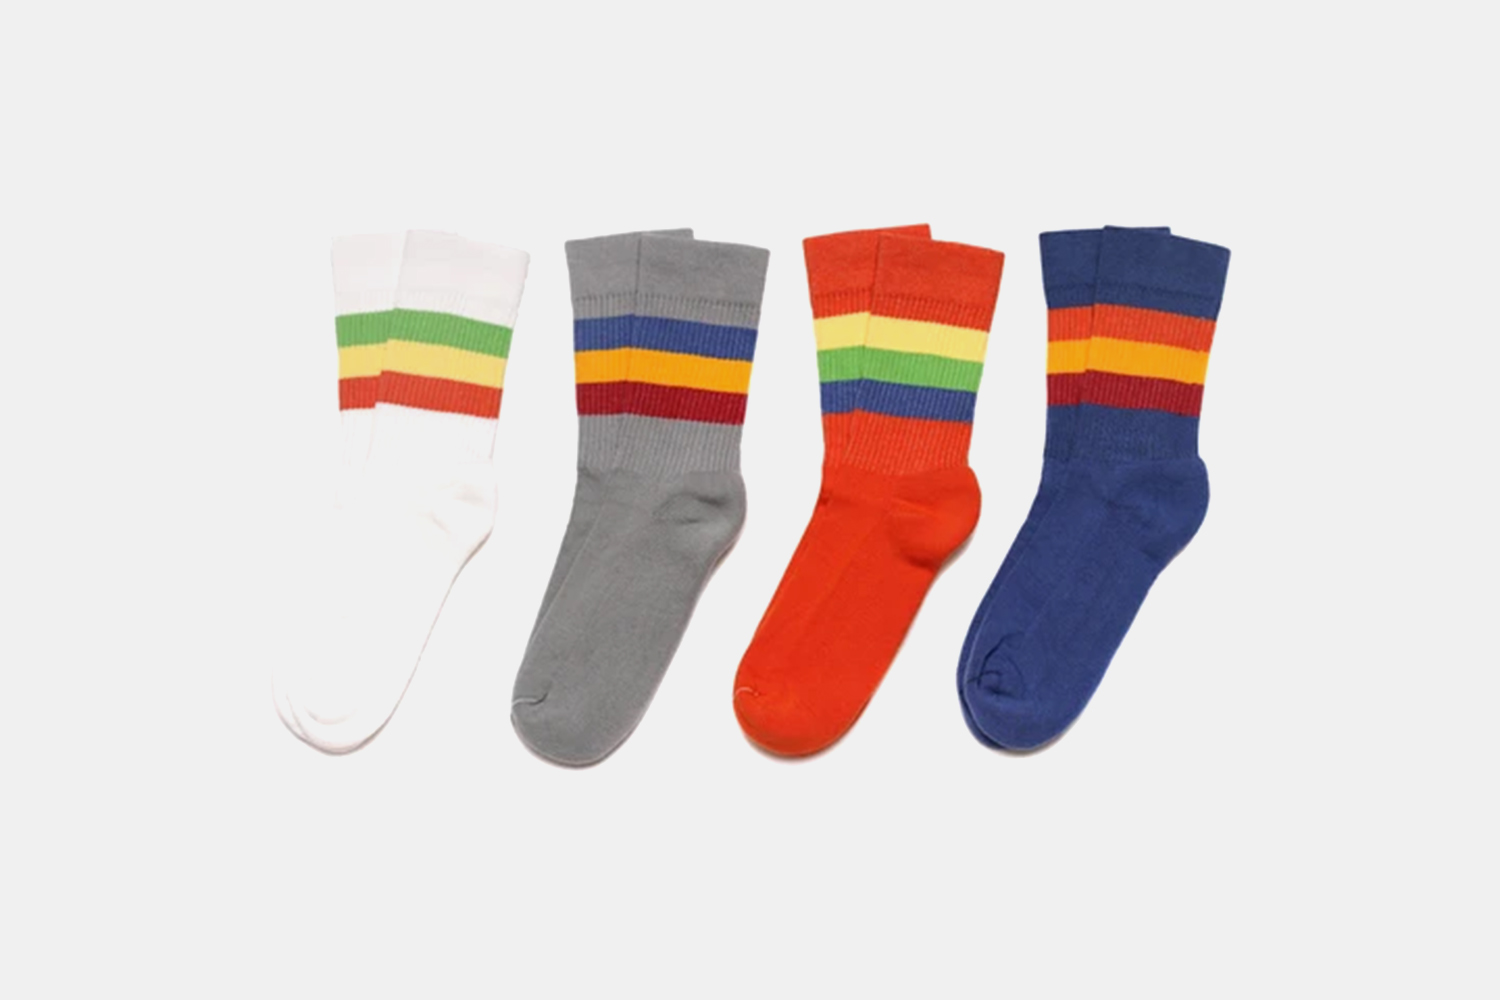 These Fun, Artist-Inspired Socks Are Only $10